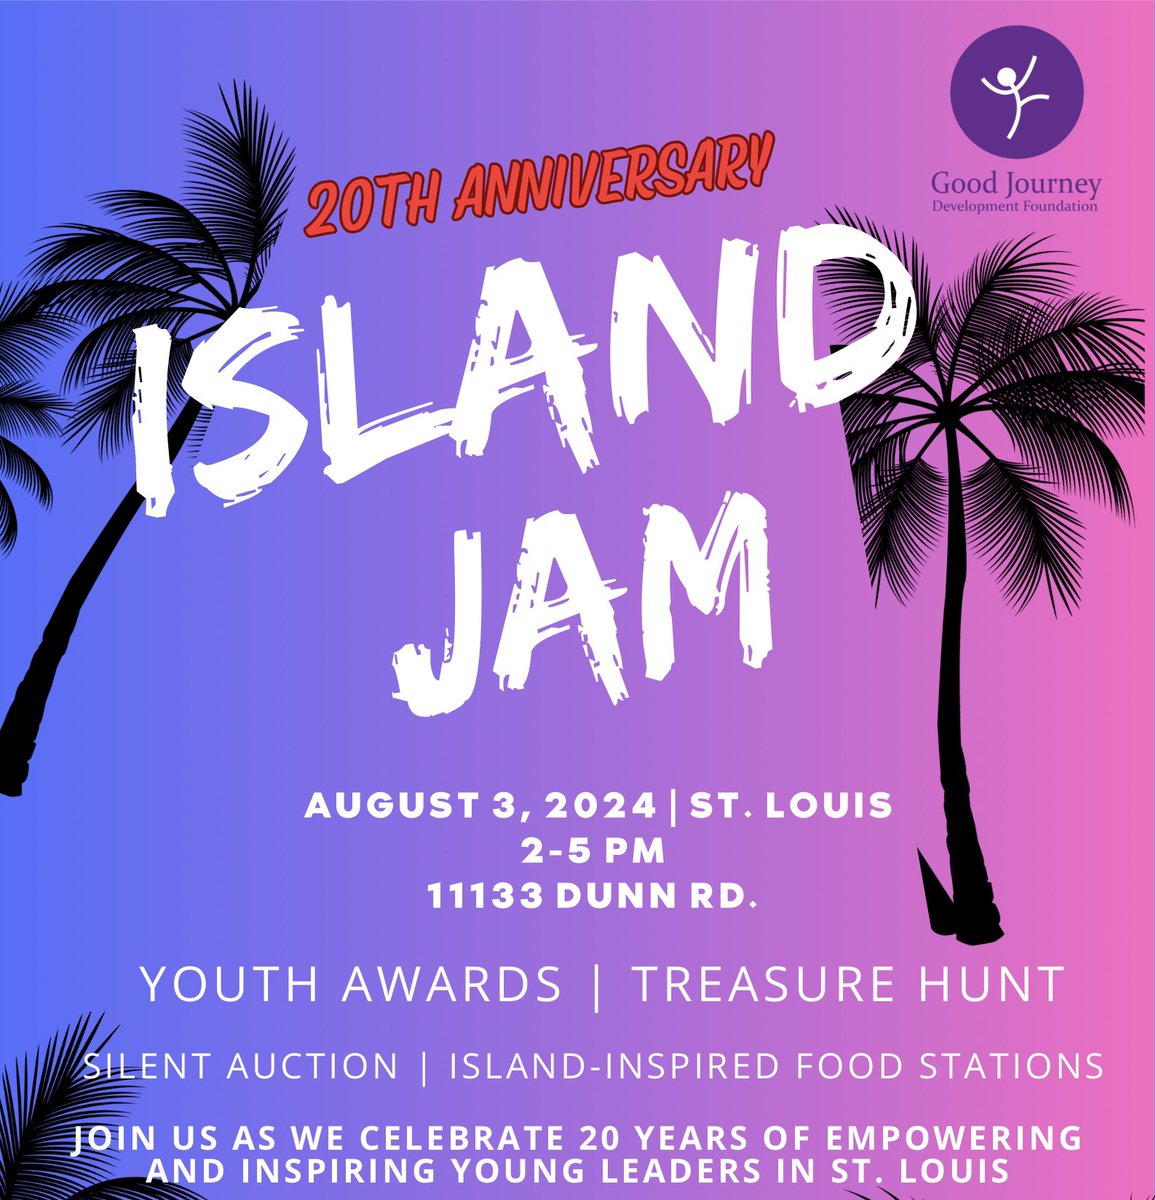 Today's the DAY! Give a little and get a lot! Buy tickets TODAY to the Good Journey Island Jam on August 3, 2024. Join us for island inspired music, food, fun treasure hunt, photos, unique raffles, auctions, and honor 7 youth leaders!
See thread below to purchase your tix!